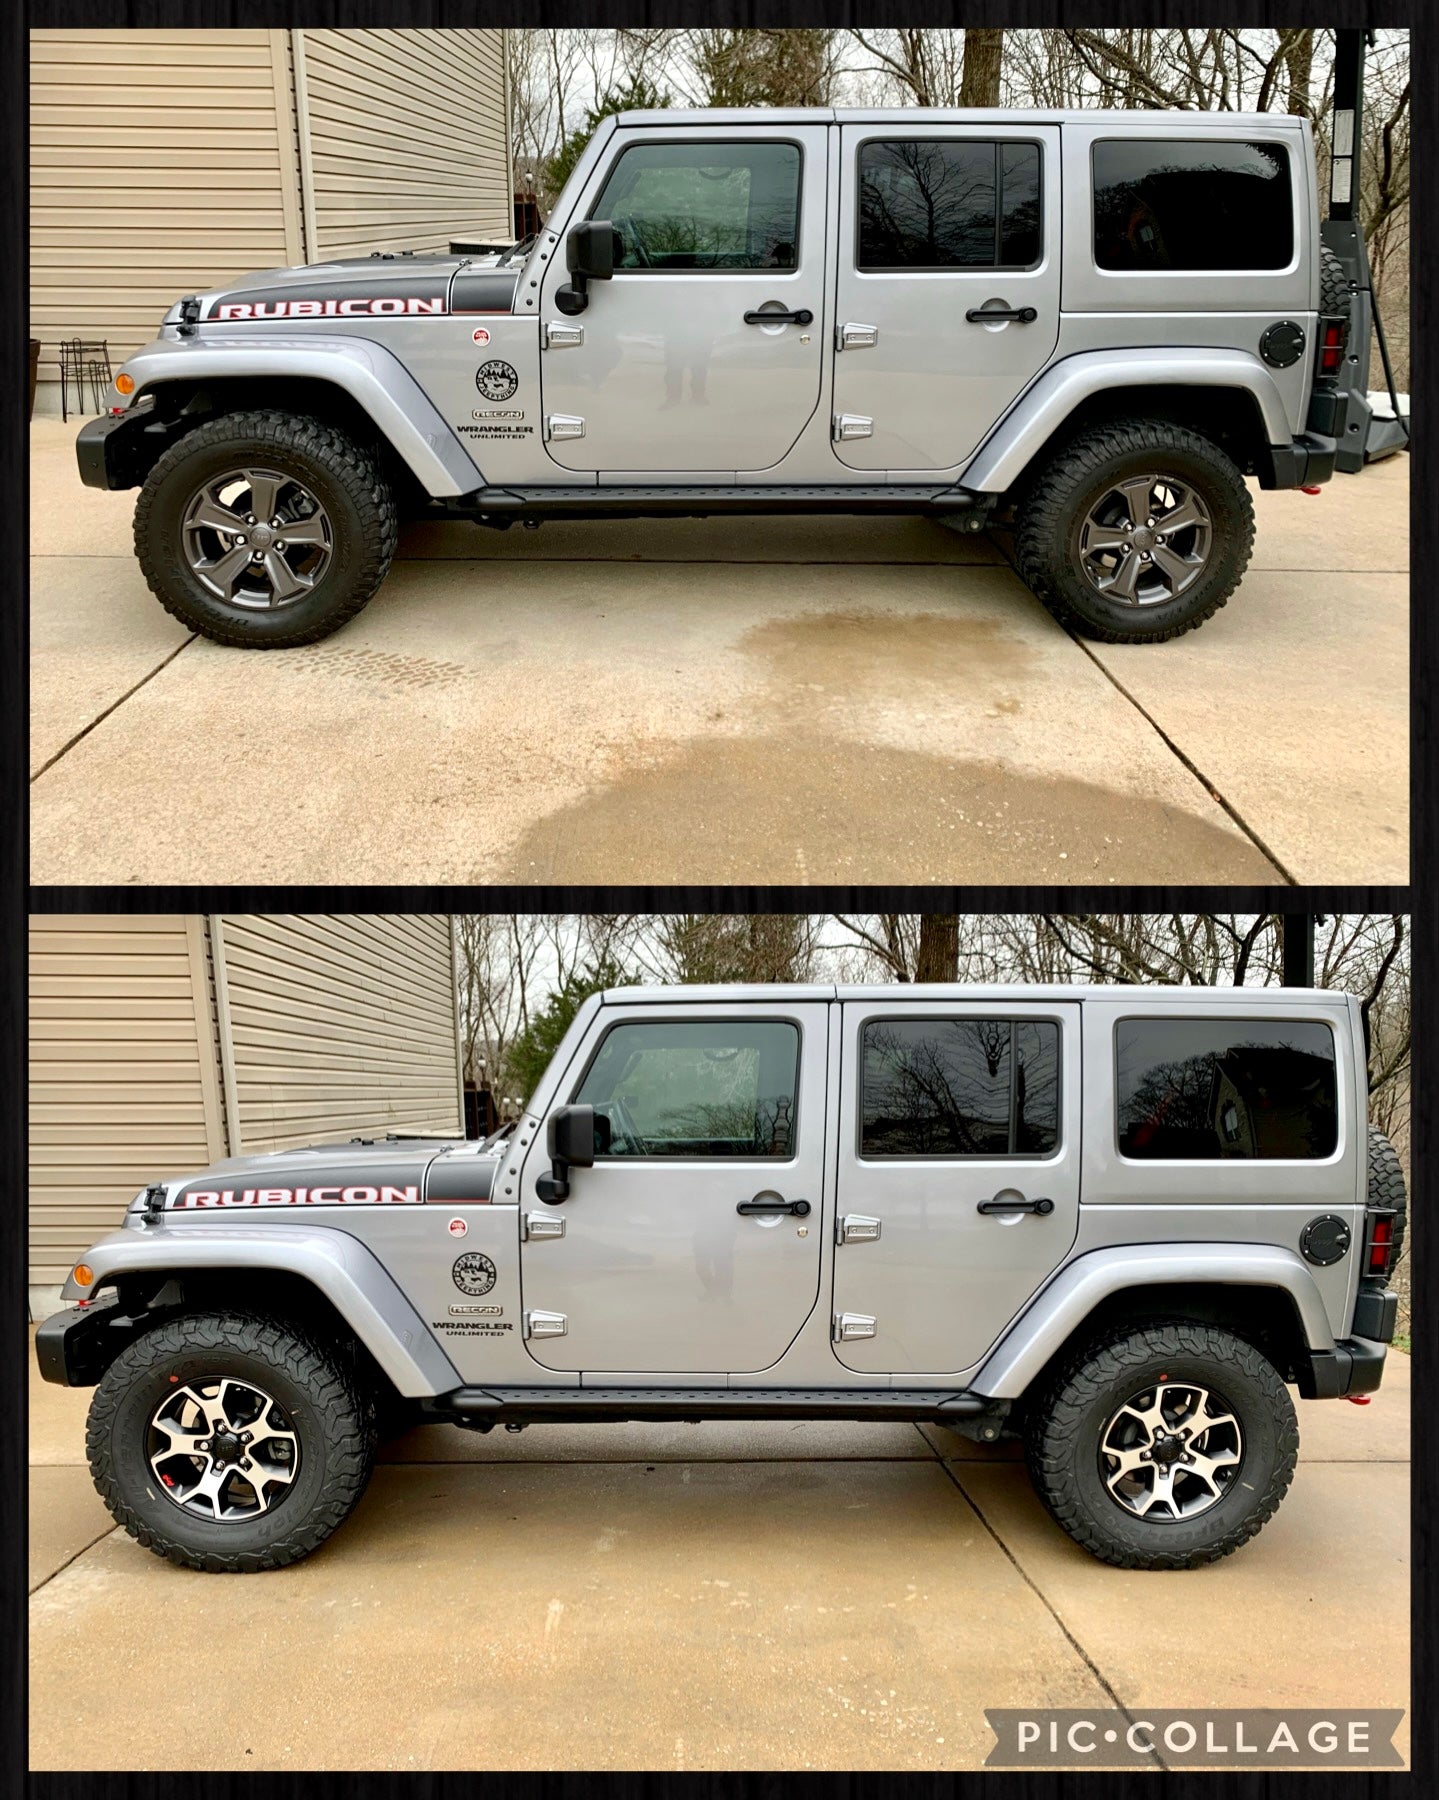 Added JL Rubicon wheels and 285/70's to my JKURR | Jeep Wrangler Forum